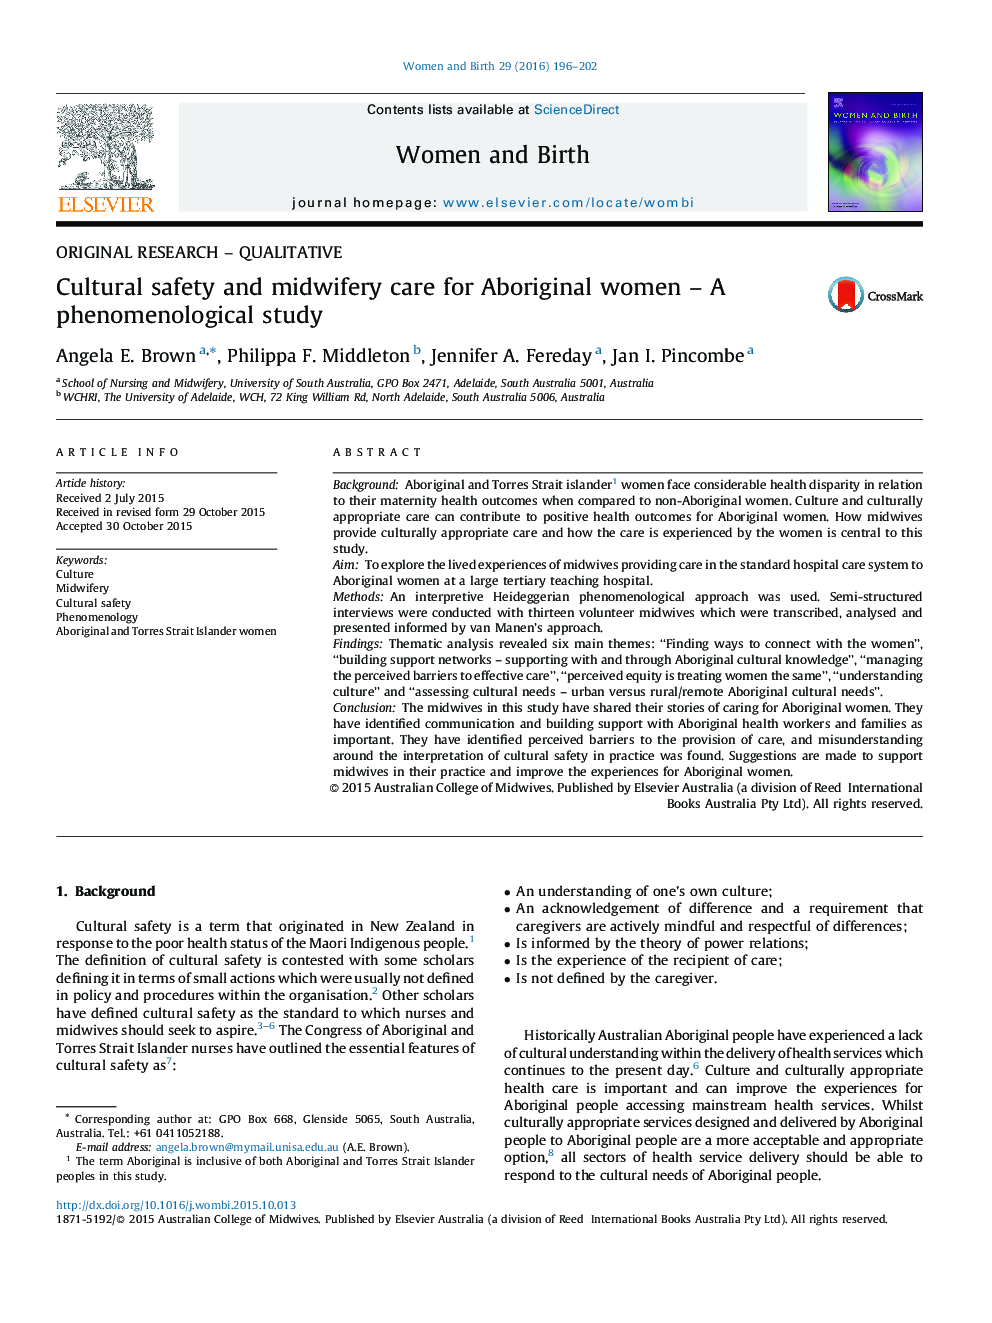 Cultural safety and midwifery care for Aboriginal women – A phenomenological study